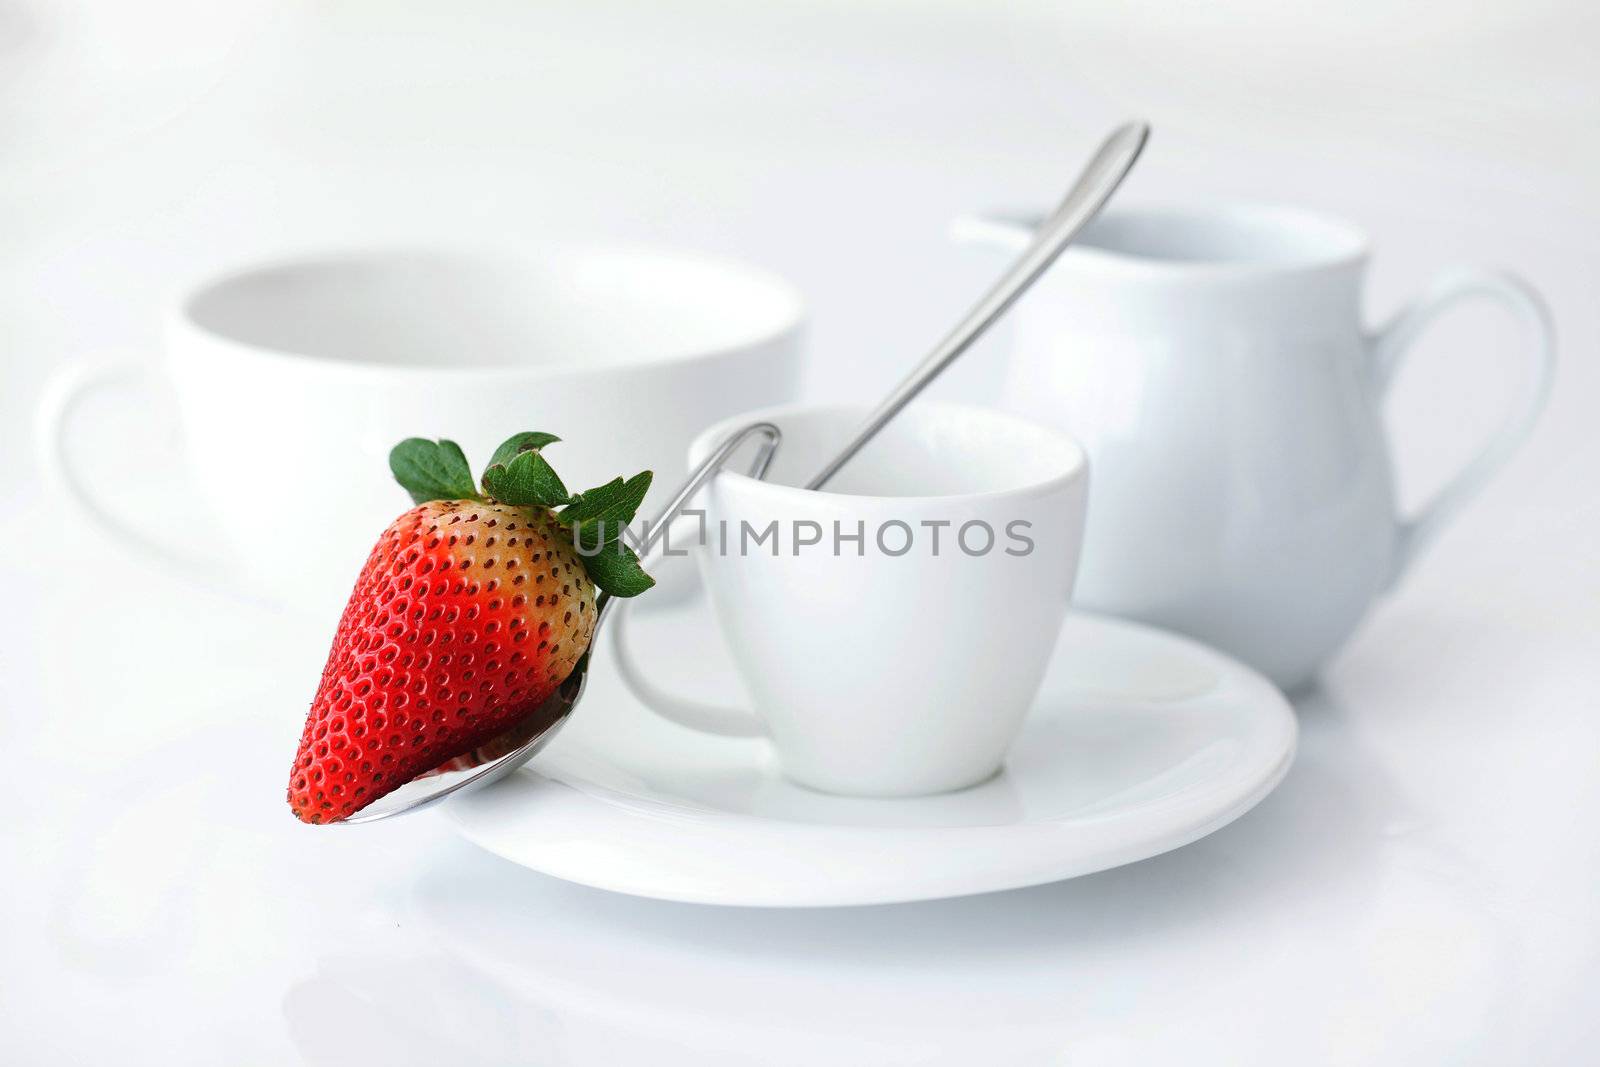 white cup with saucer, milk jug and strawberry